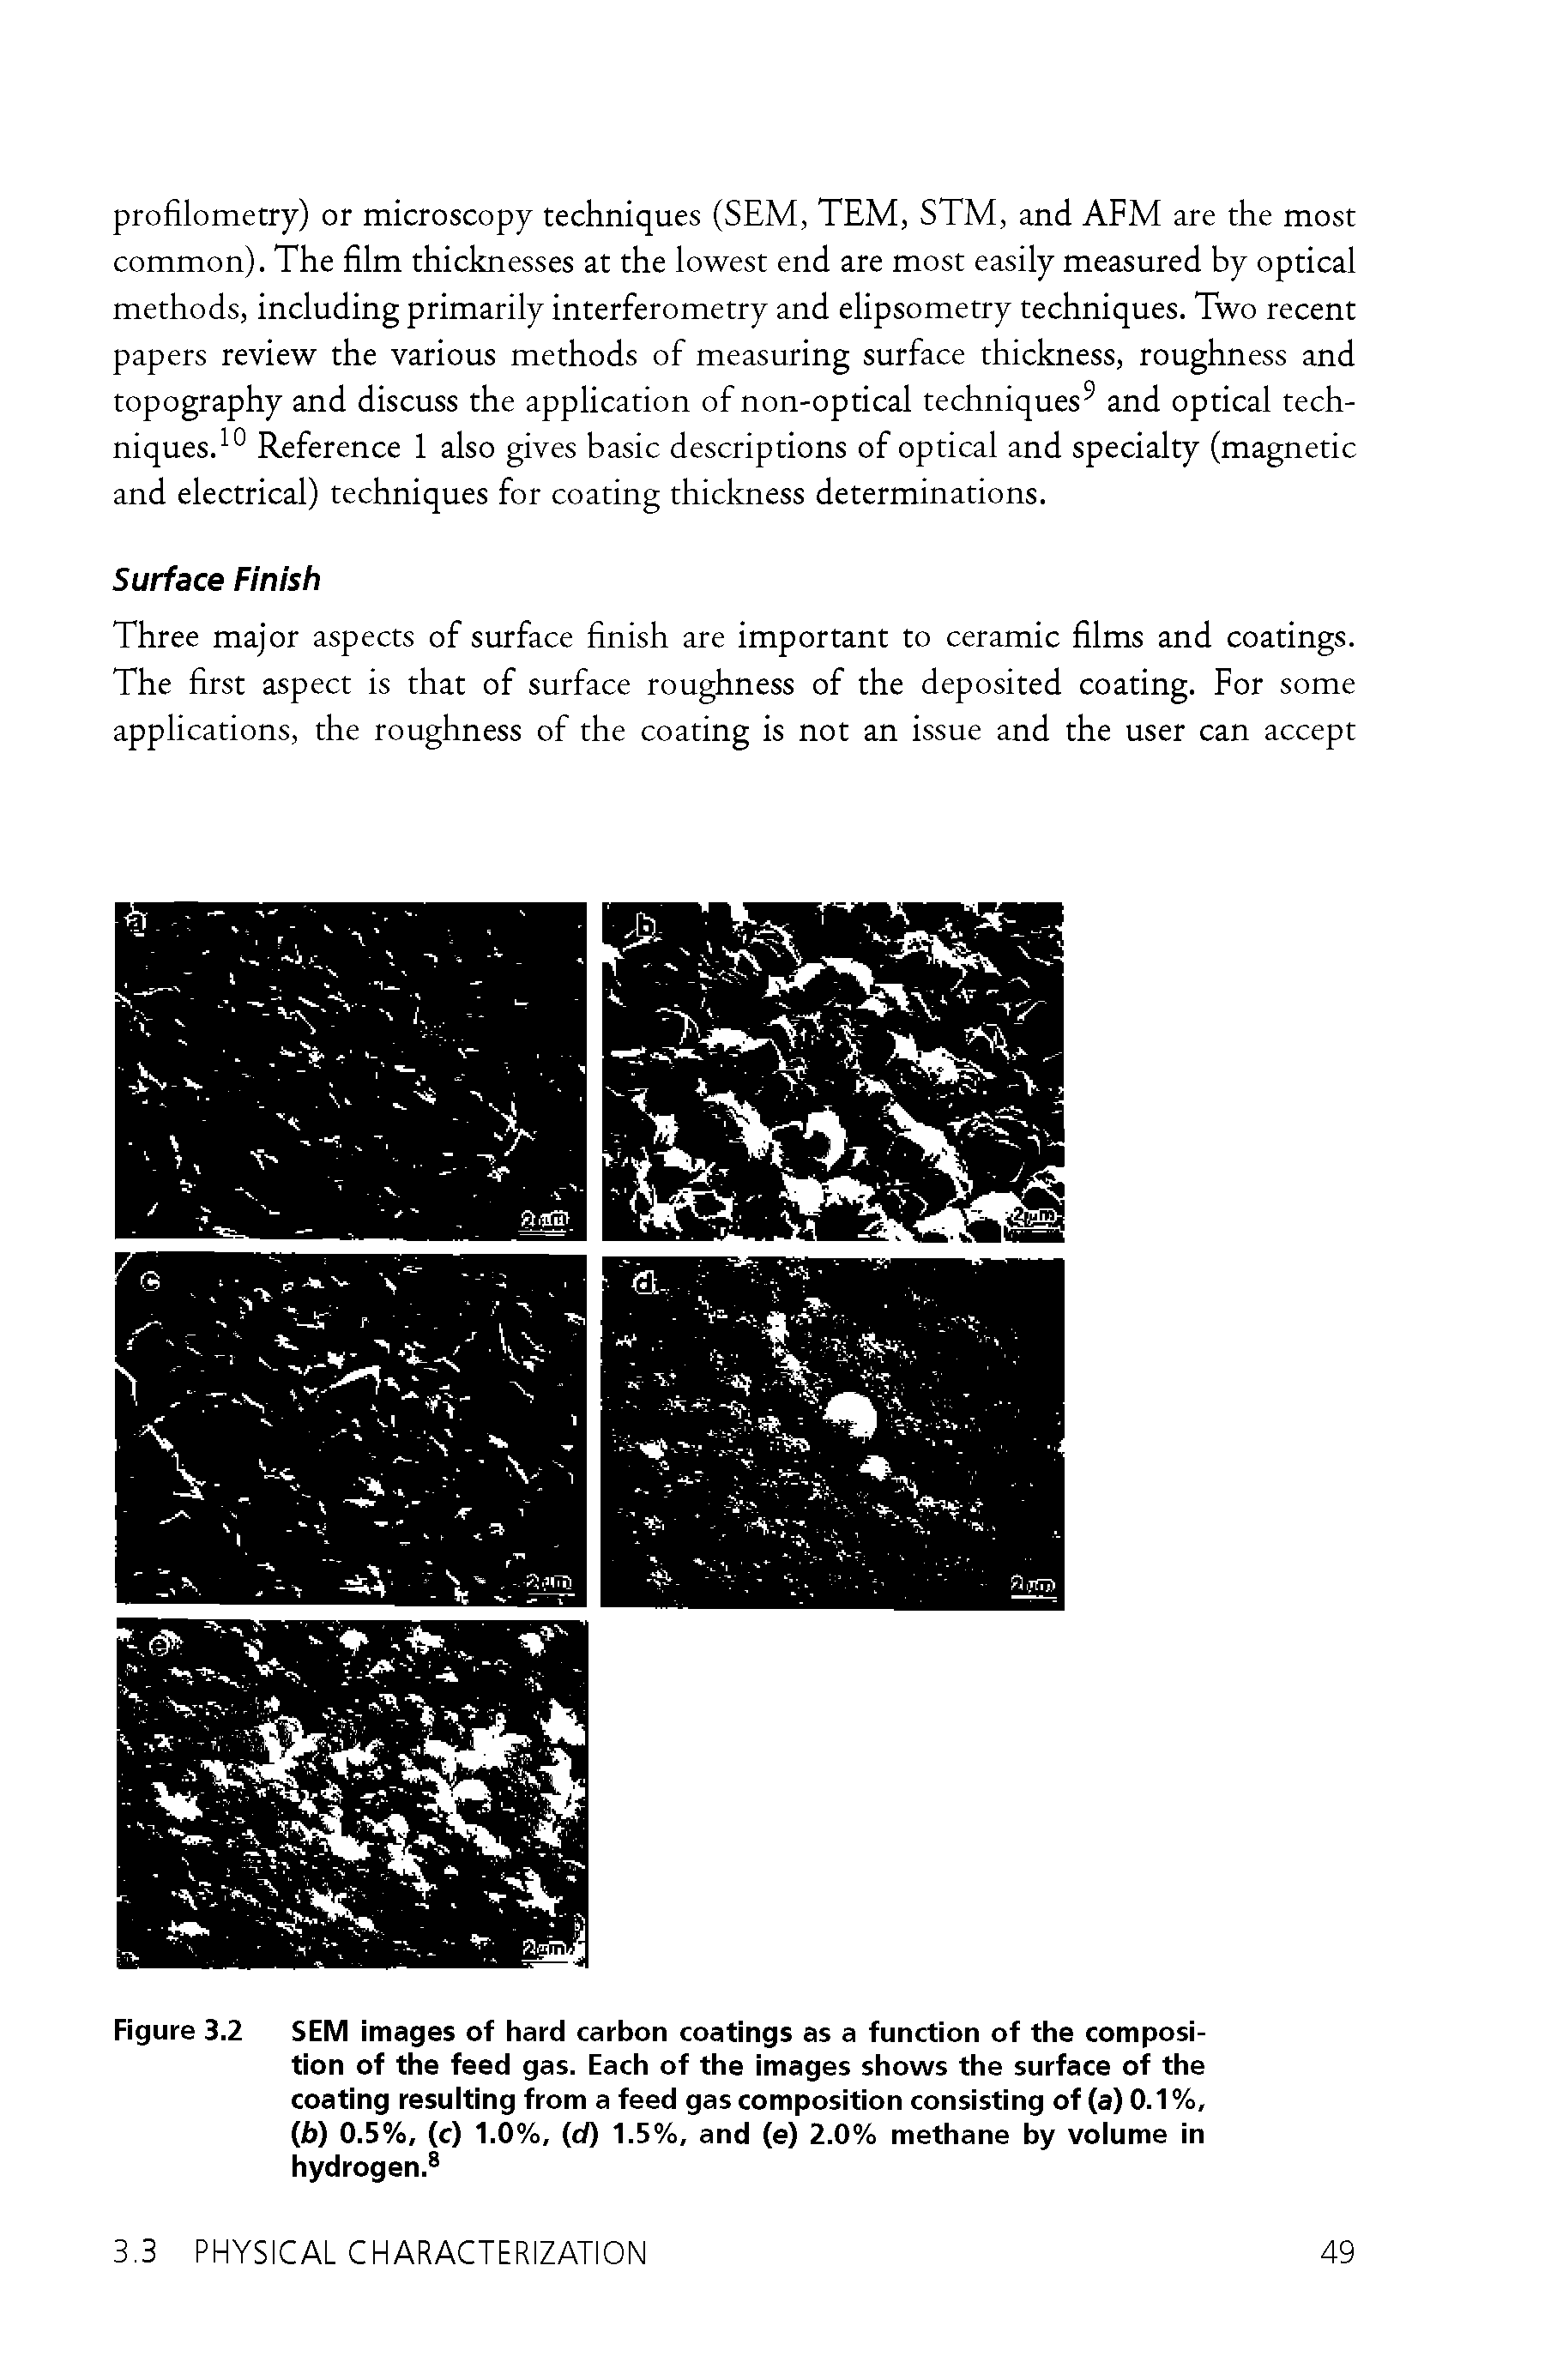 Figure 3.2 SEM images of hard carbon coatings as a function of the composition of the feed gas. Each of the images shows the surface of the coating resulting from a feed gas composition consisting of (a) 0.1 %, (fa) 0.5%, (c) 1.0%, (d) 1.5%, and (e) 2.0% methane by volume in hydrogen. ...